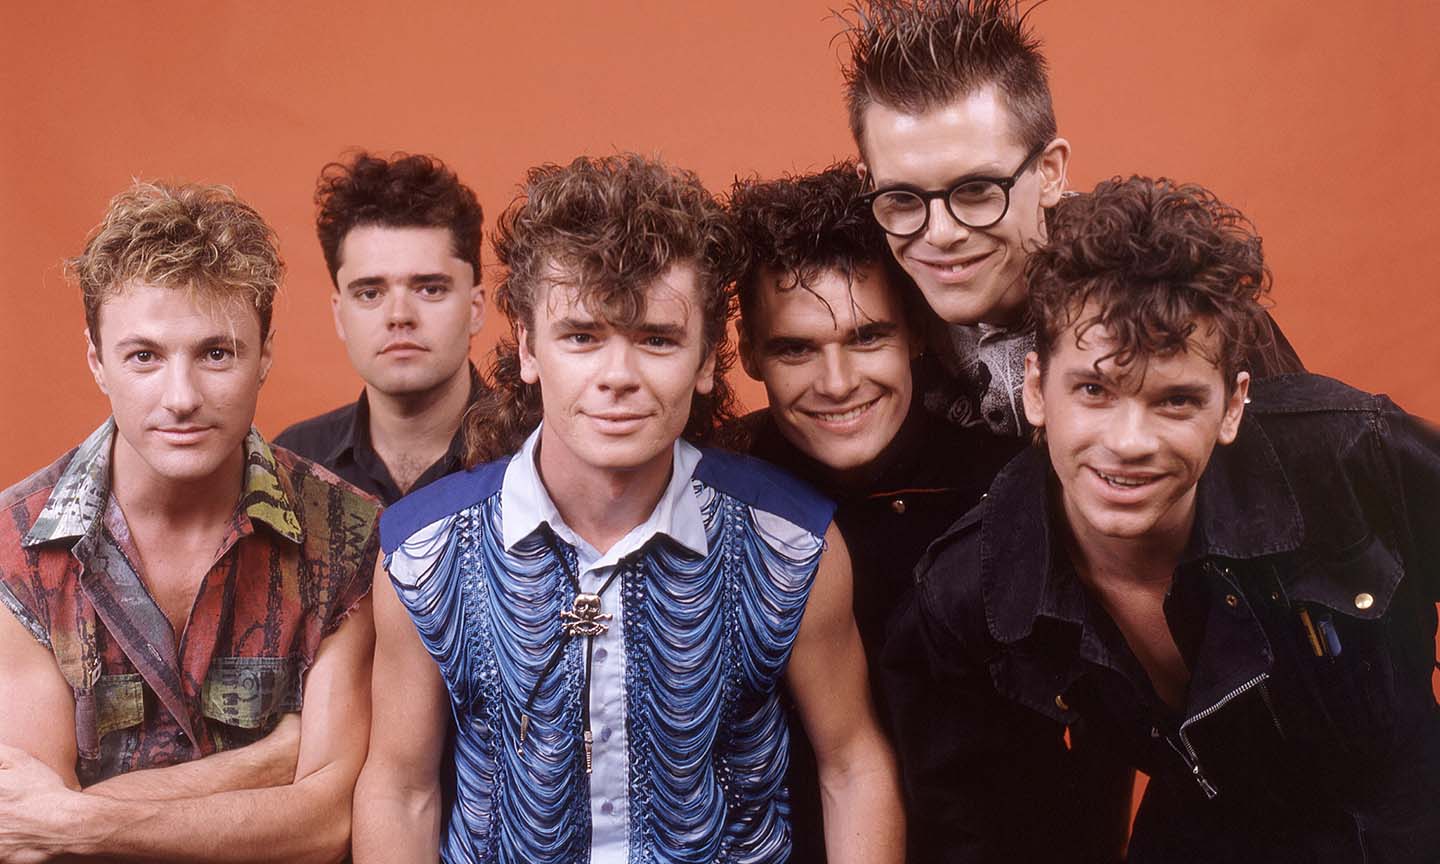 Top 80's Hair Bands According to the Hudson Valley